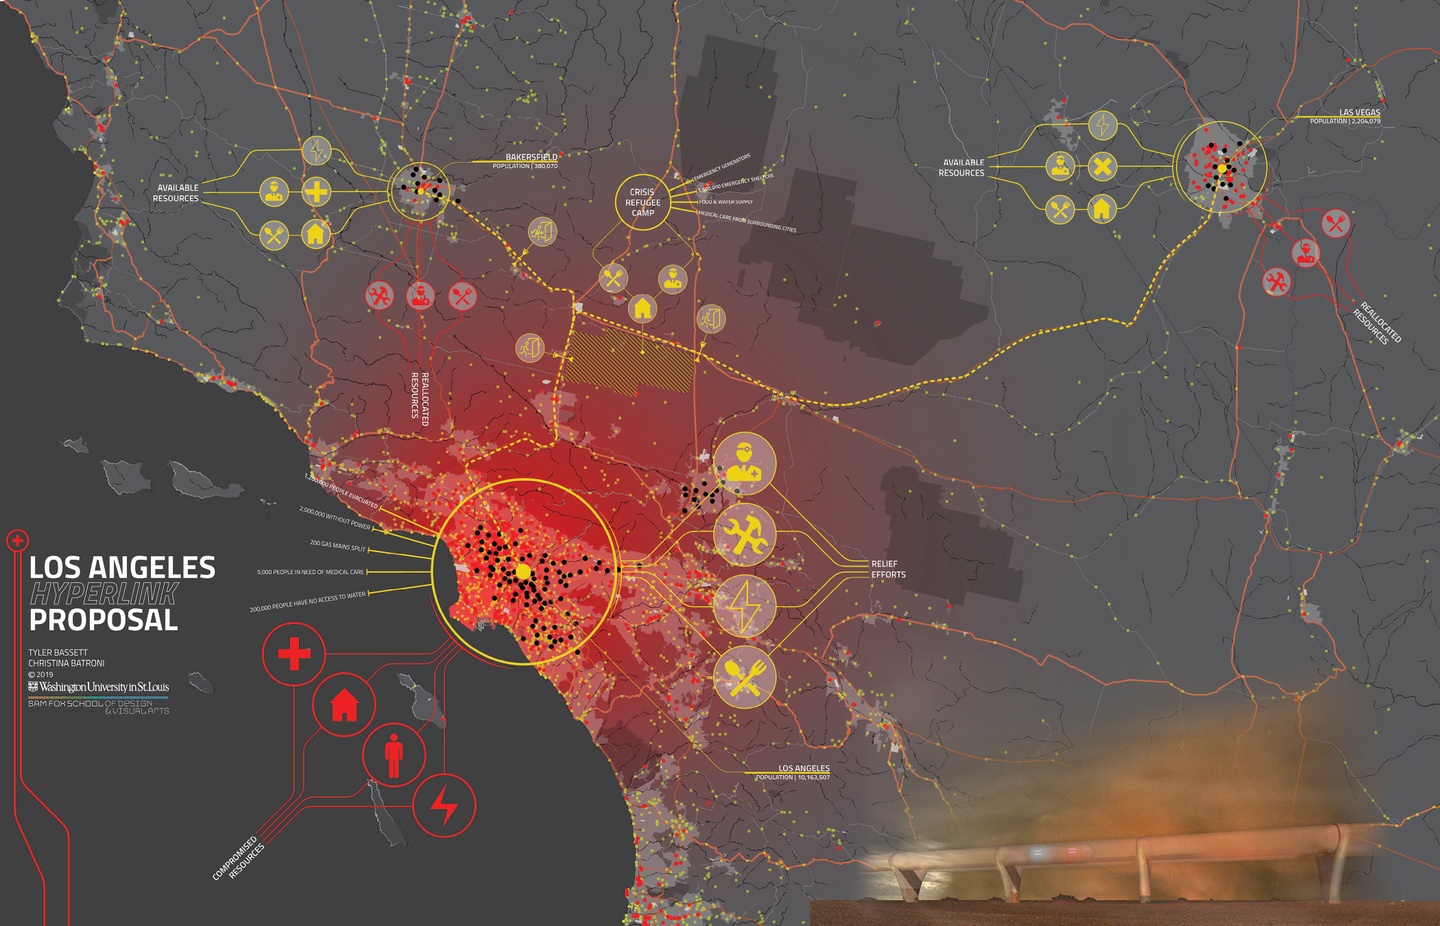 [Student work] A map proposal of the hyperlink in Los Angeles visualizing what it can provide access and resources to